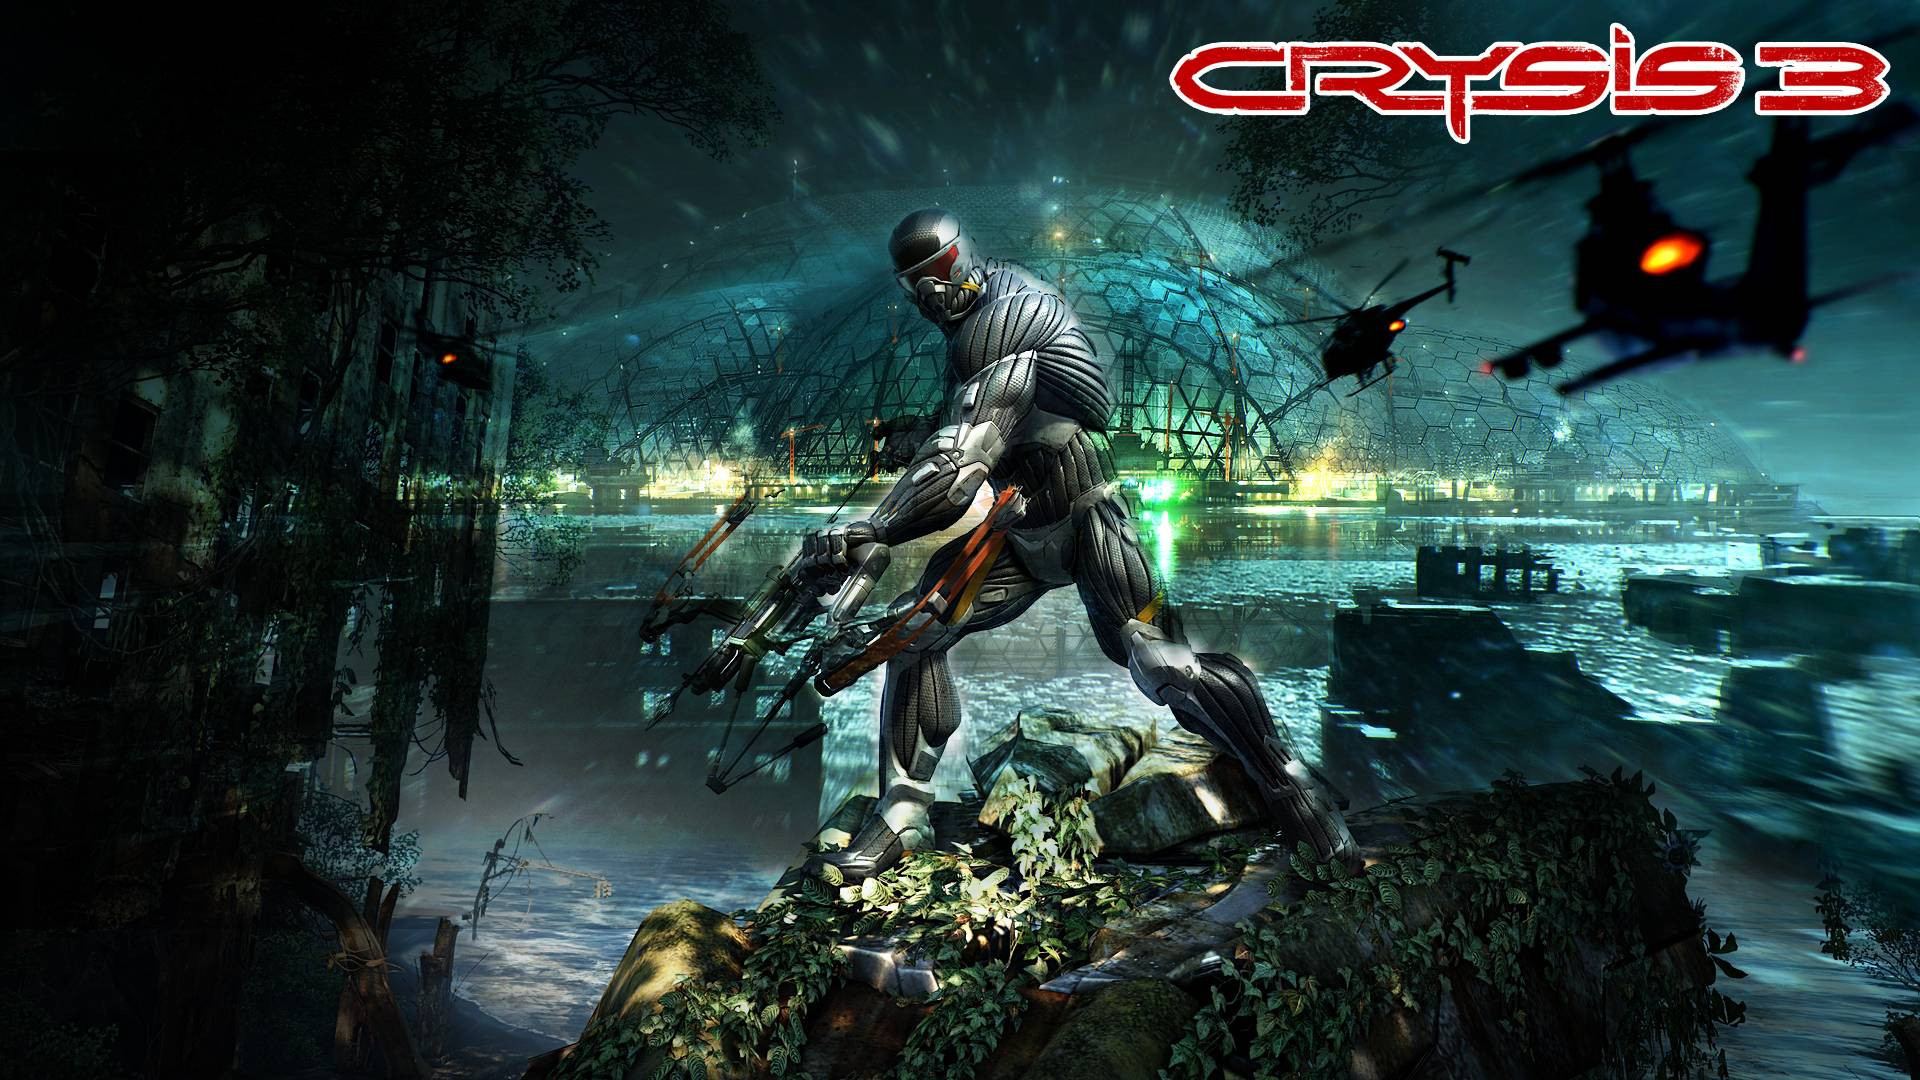 1920x1080 Download Many Resolution: Click Here (to Attachment Page). This Crysis 3  Wallpaper ...